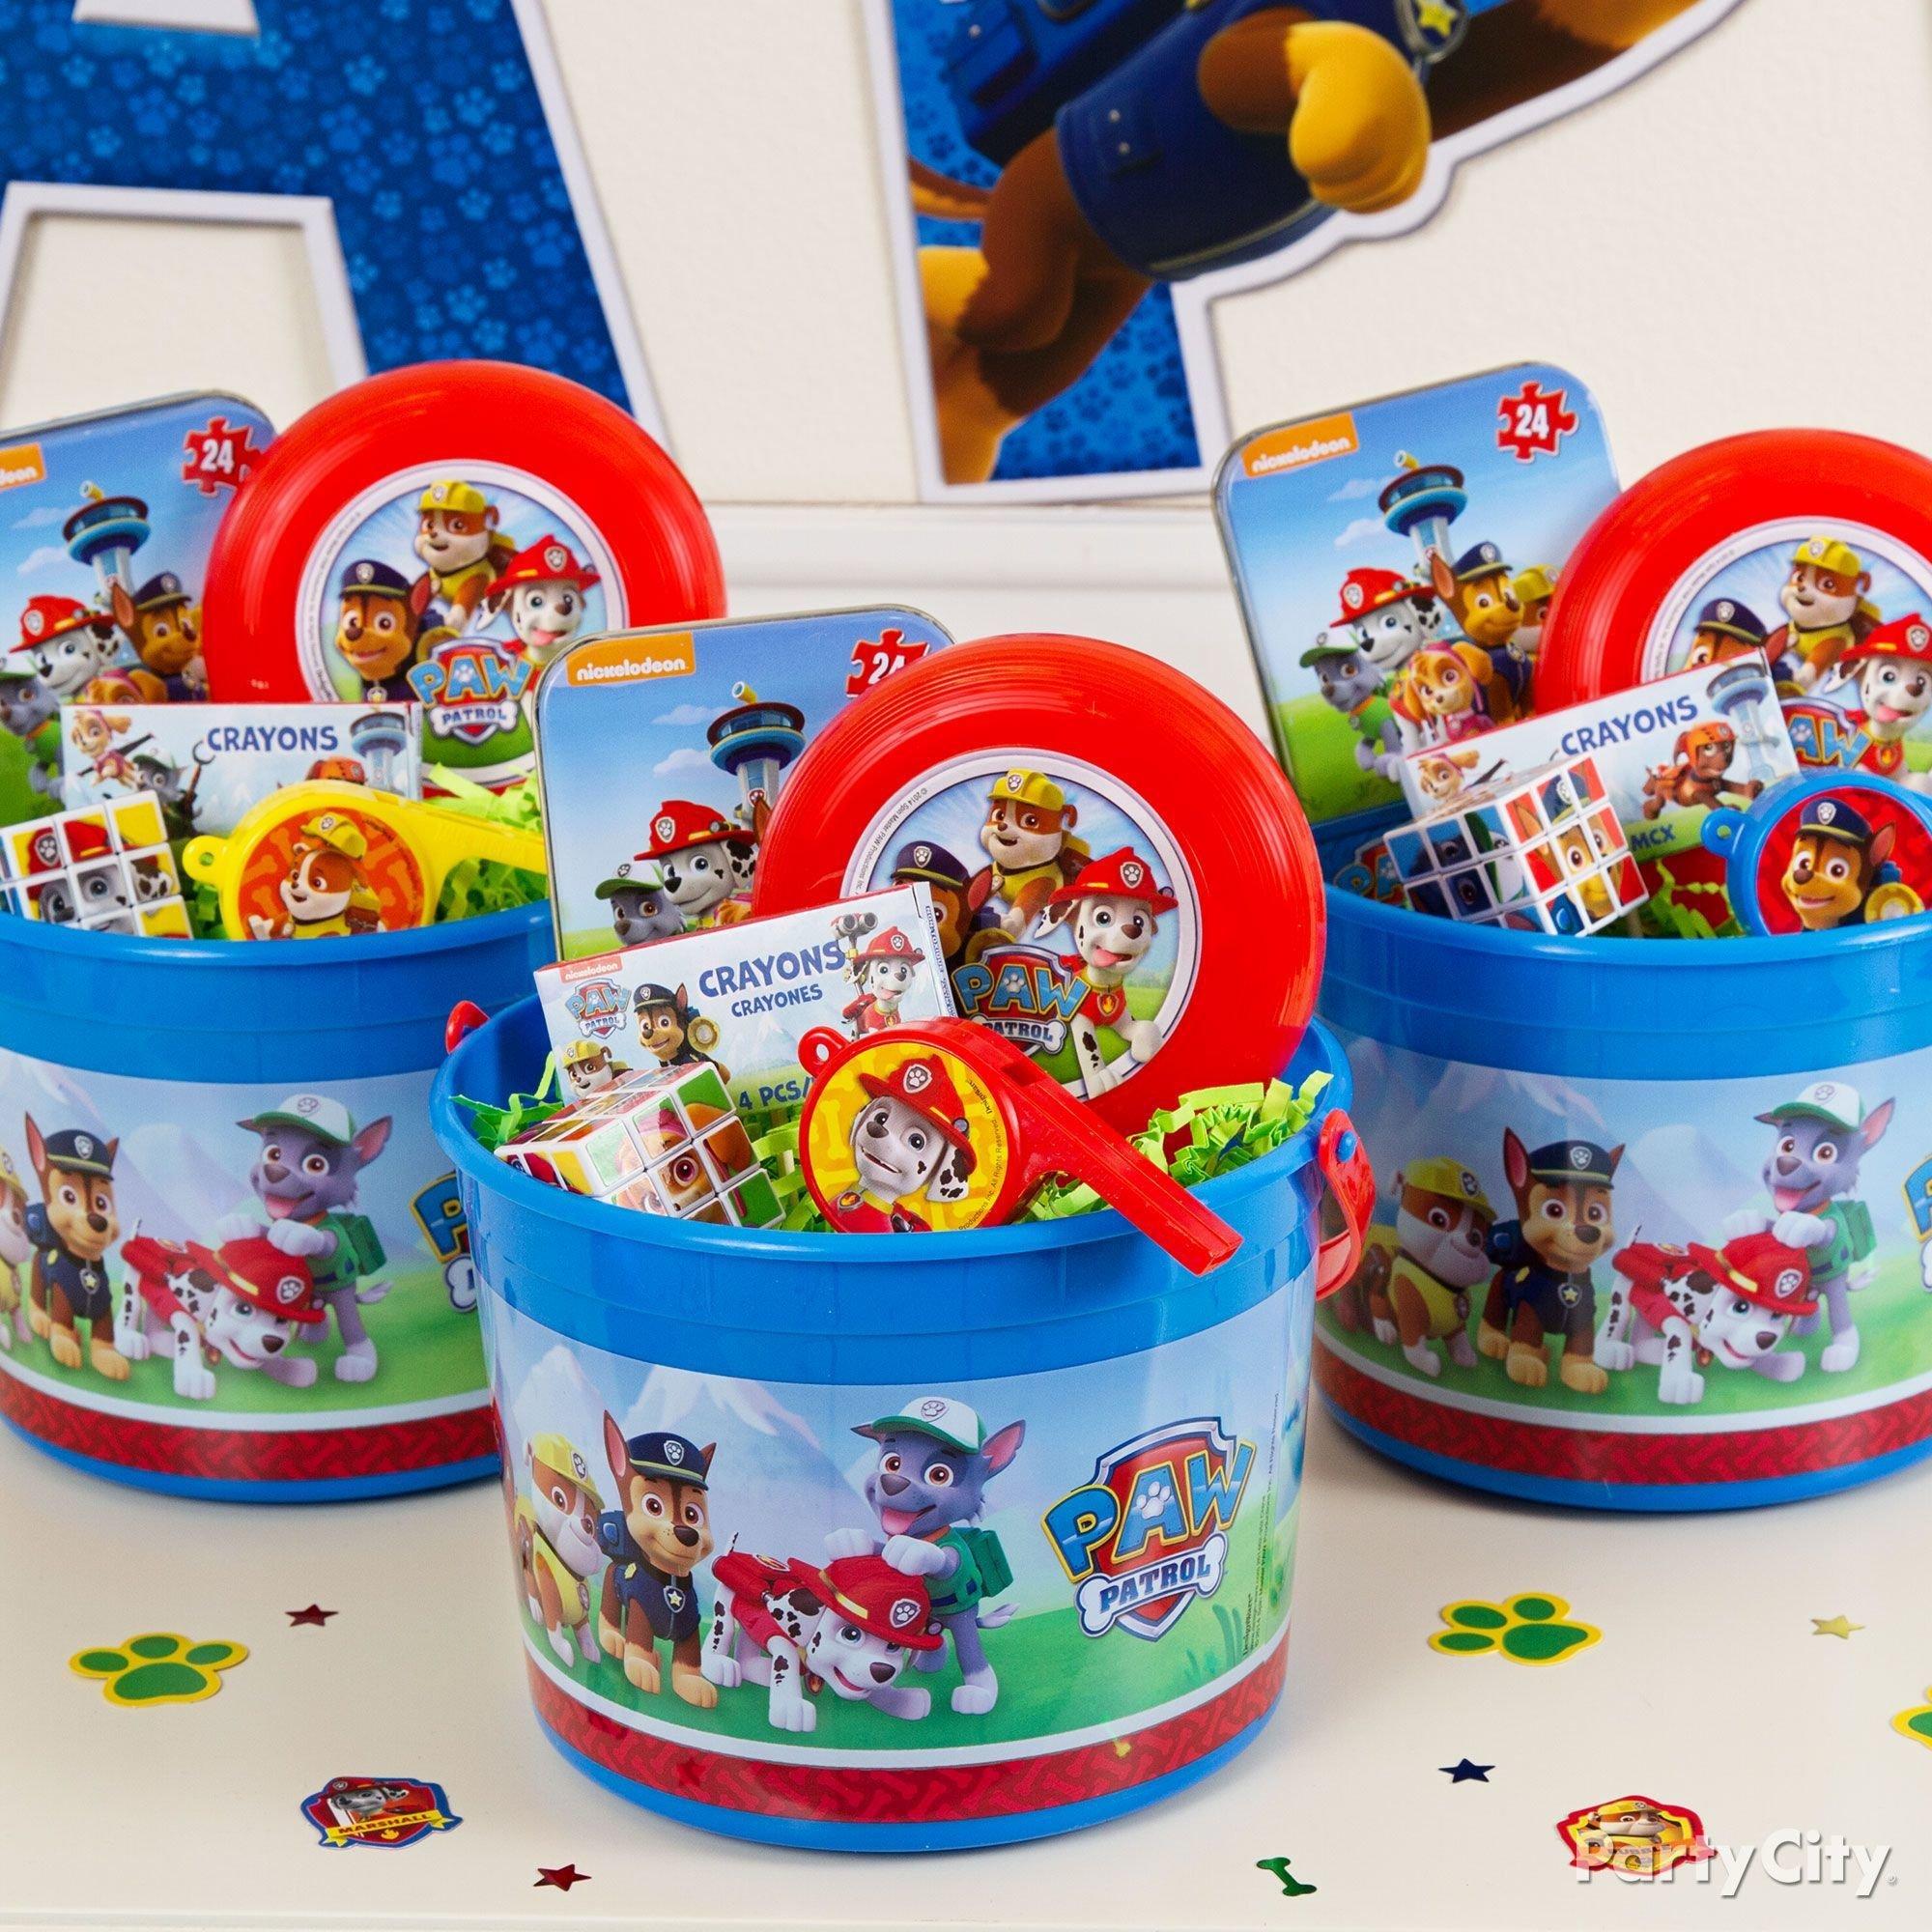 PAW Patrol Favor Containers